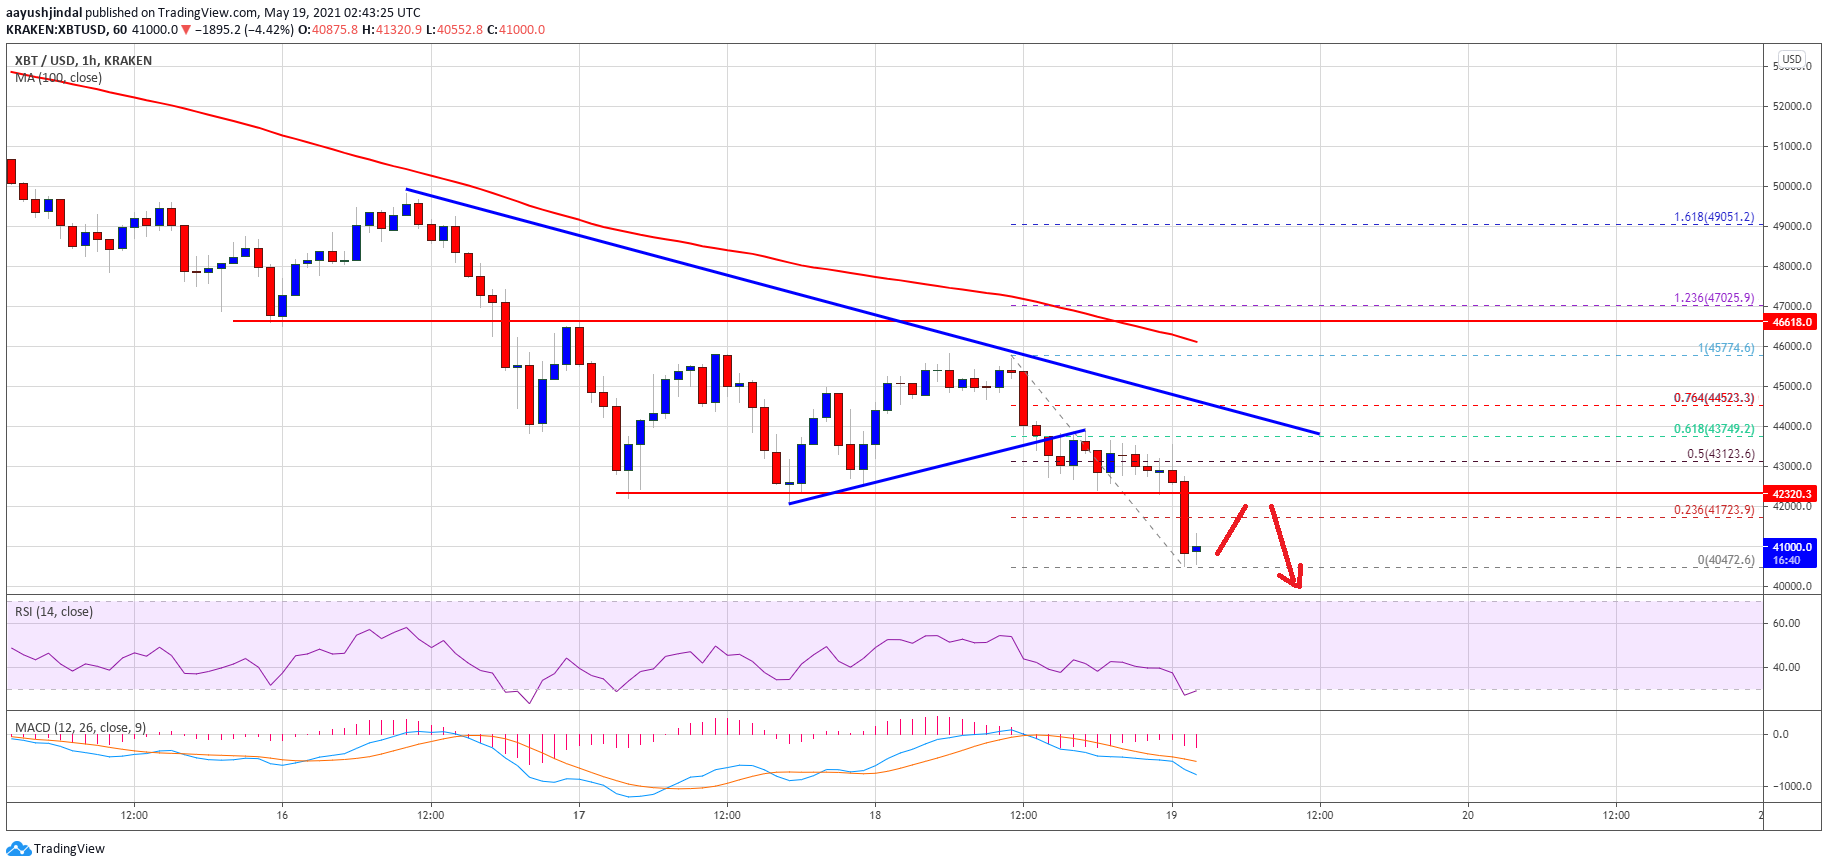 TA: Bitcoin Breaks Key Support, Here's Why BTC Could Dive Below $40K